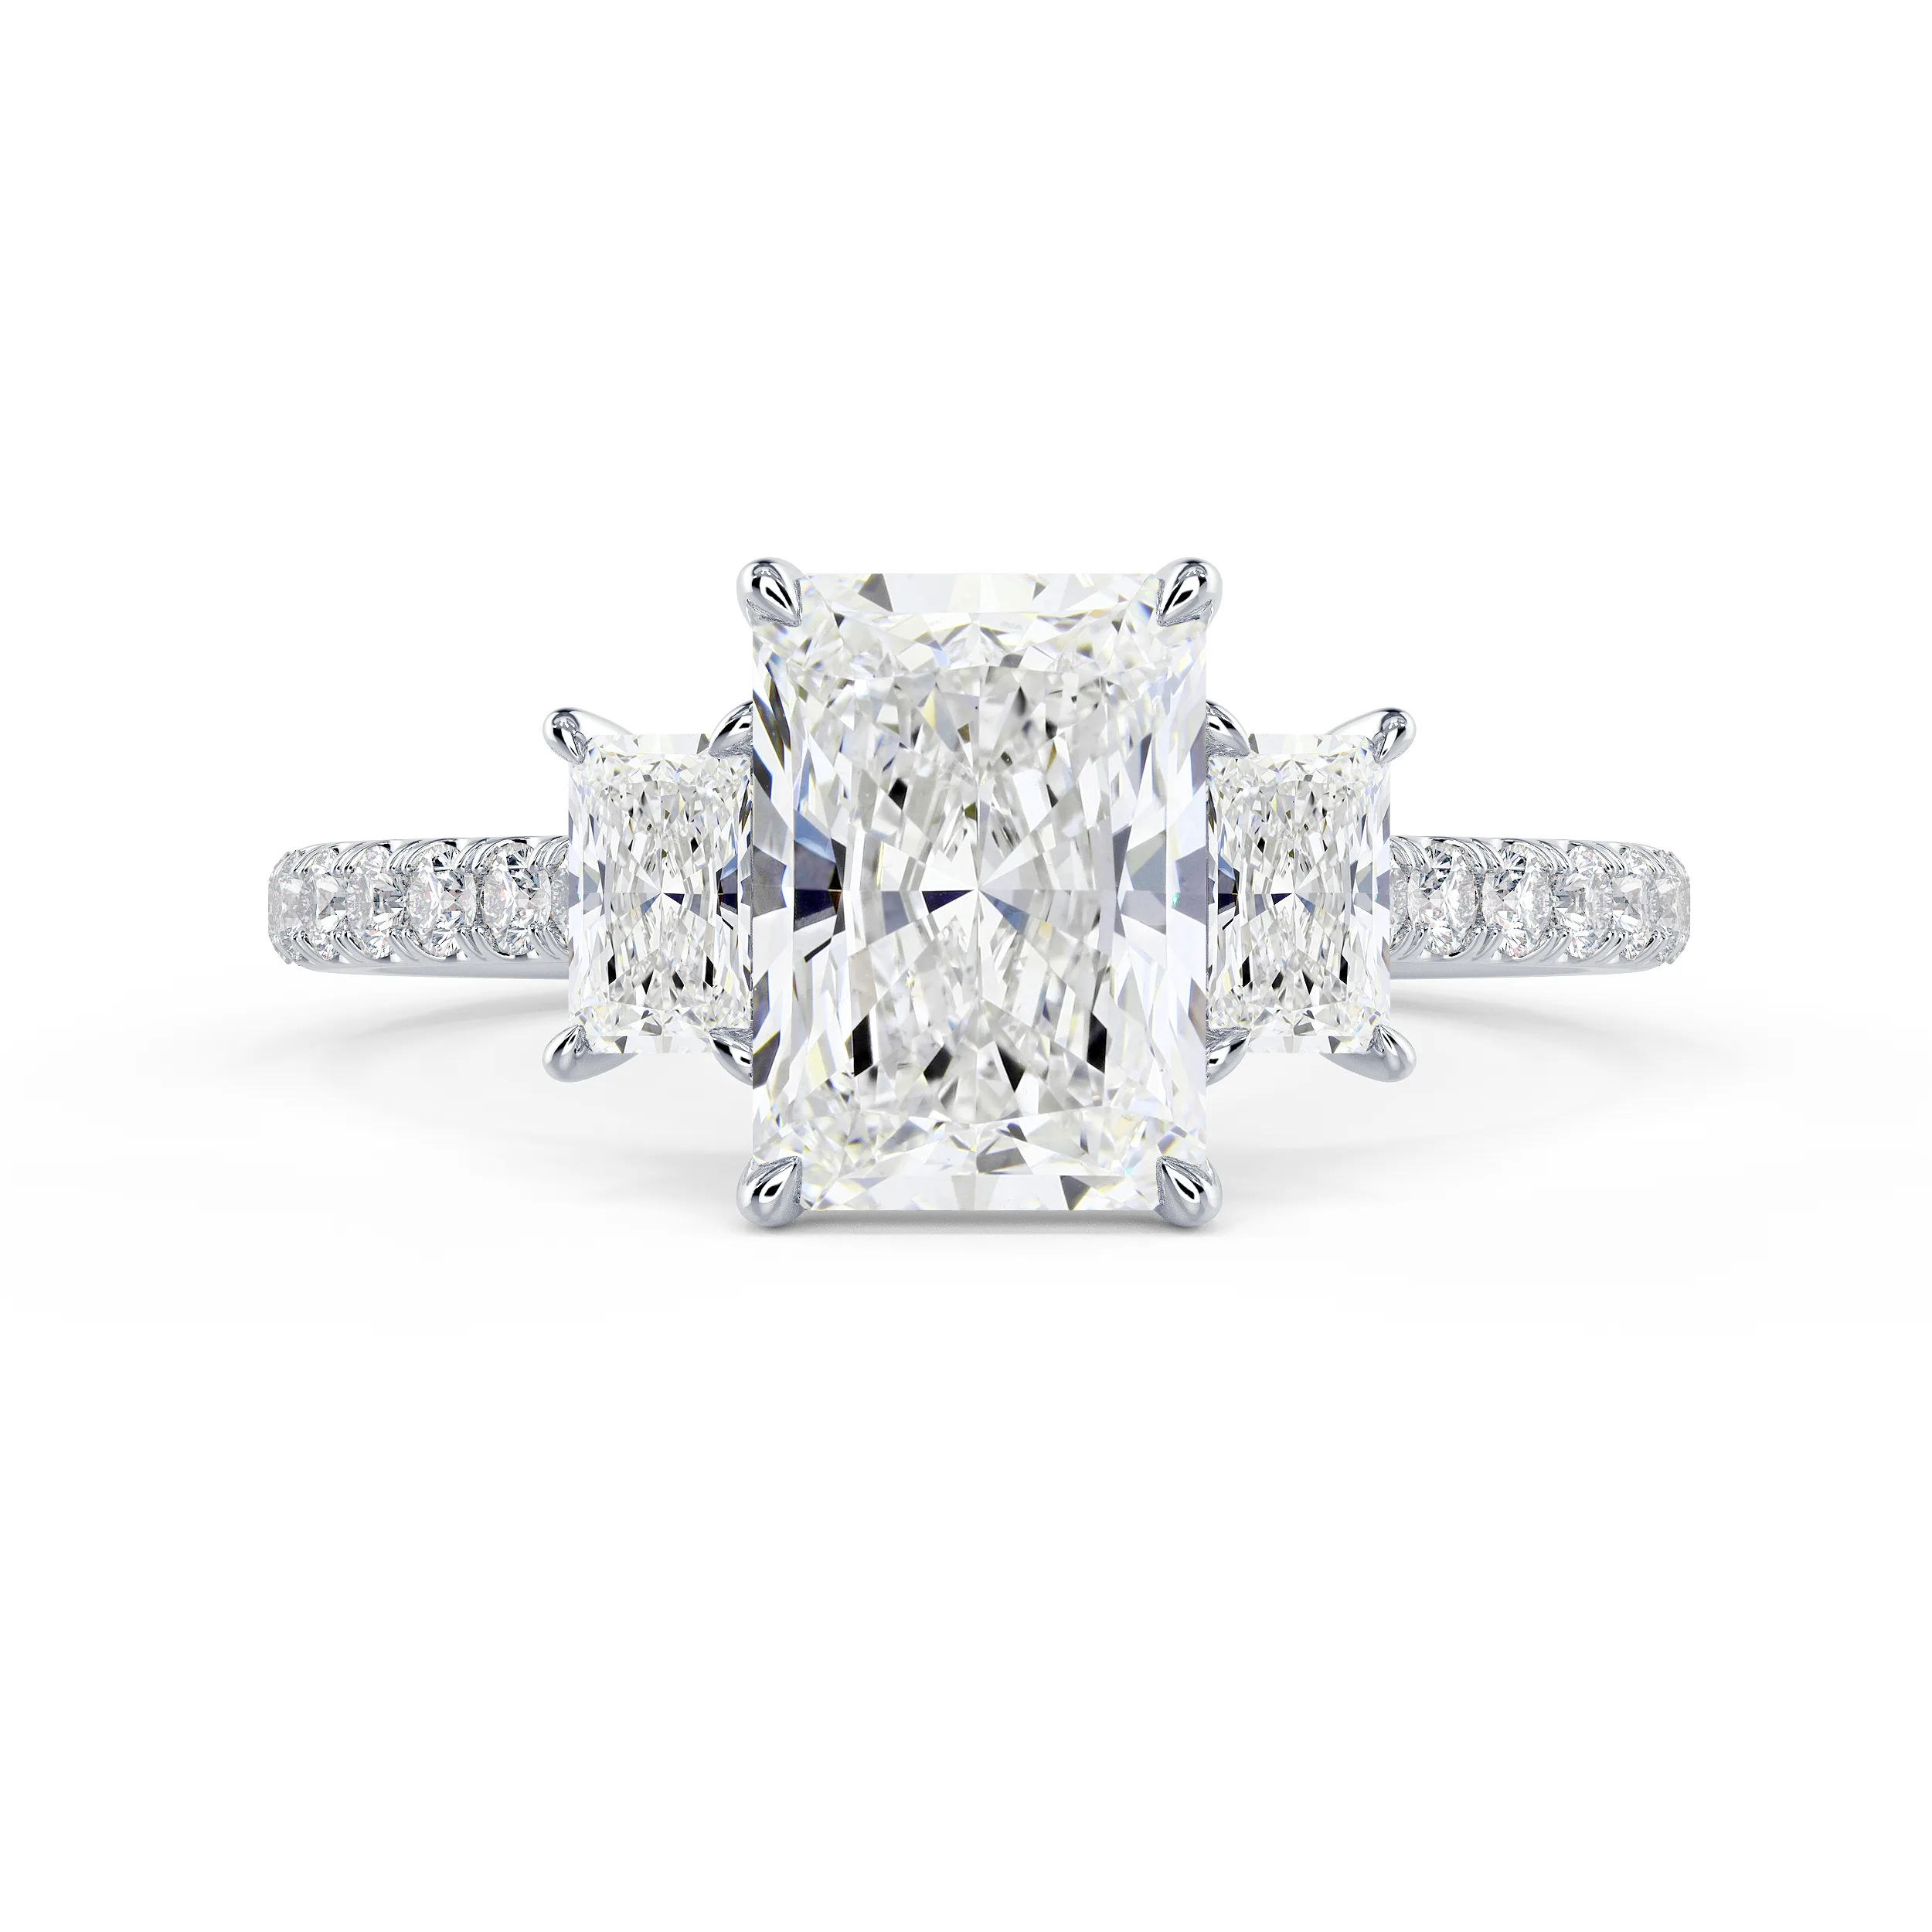 Exceptional Quality Diamonds set in White Gold Radiant Three Stone Pavé Diamond Engagement Ring (Main View)